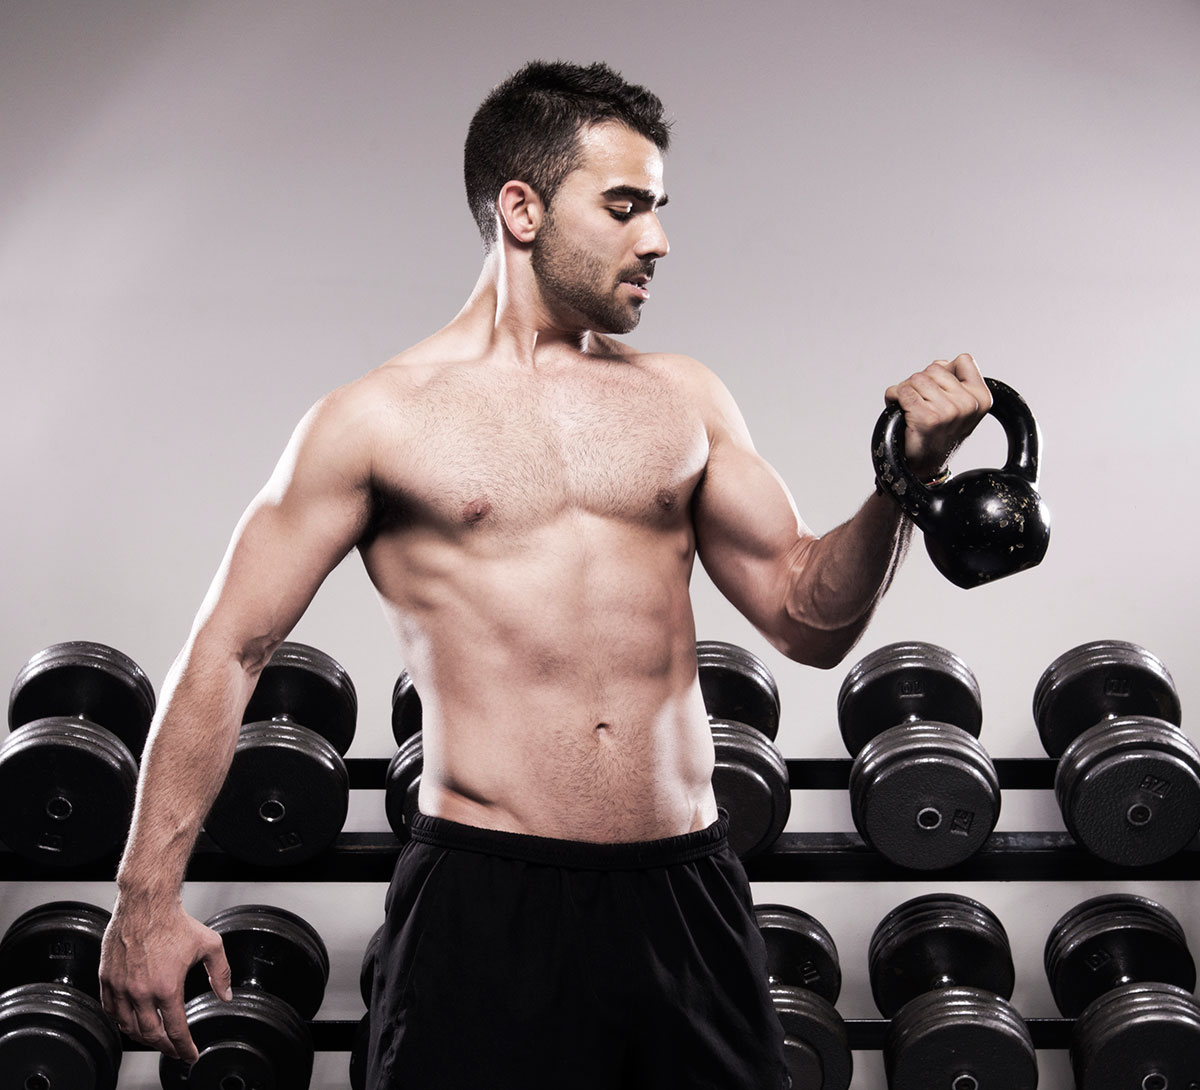 West Coast Fitness instructor demonstrates arm curls with a kettle bell | Commercial Photography